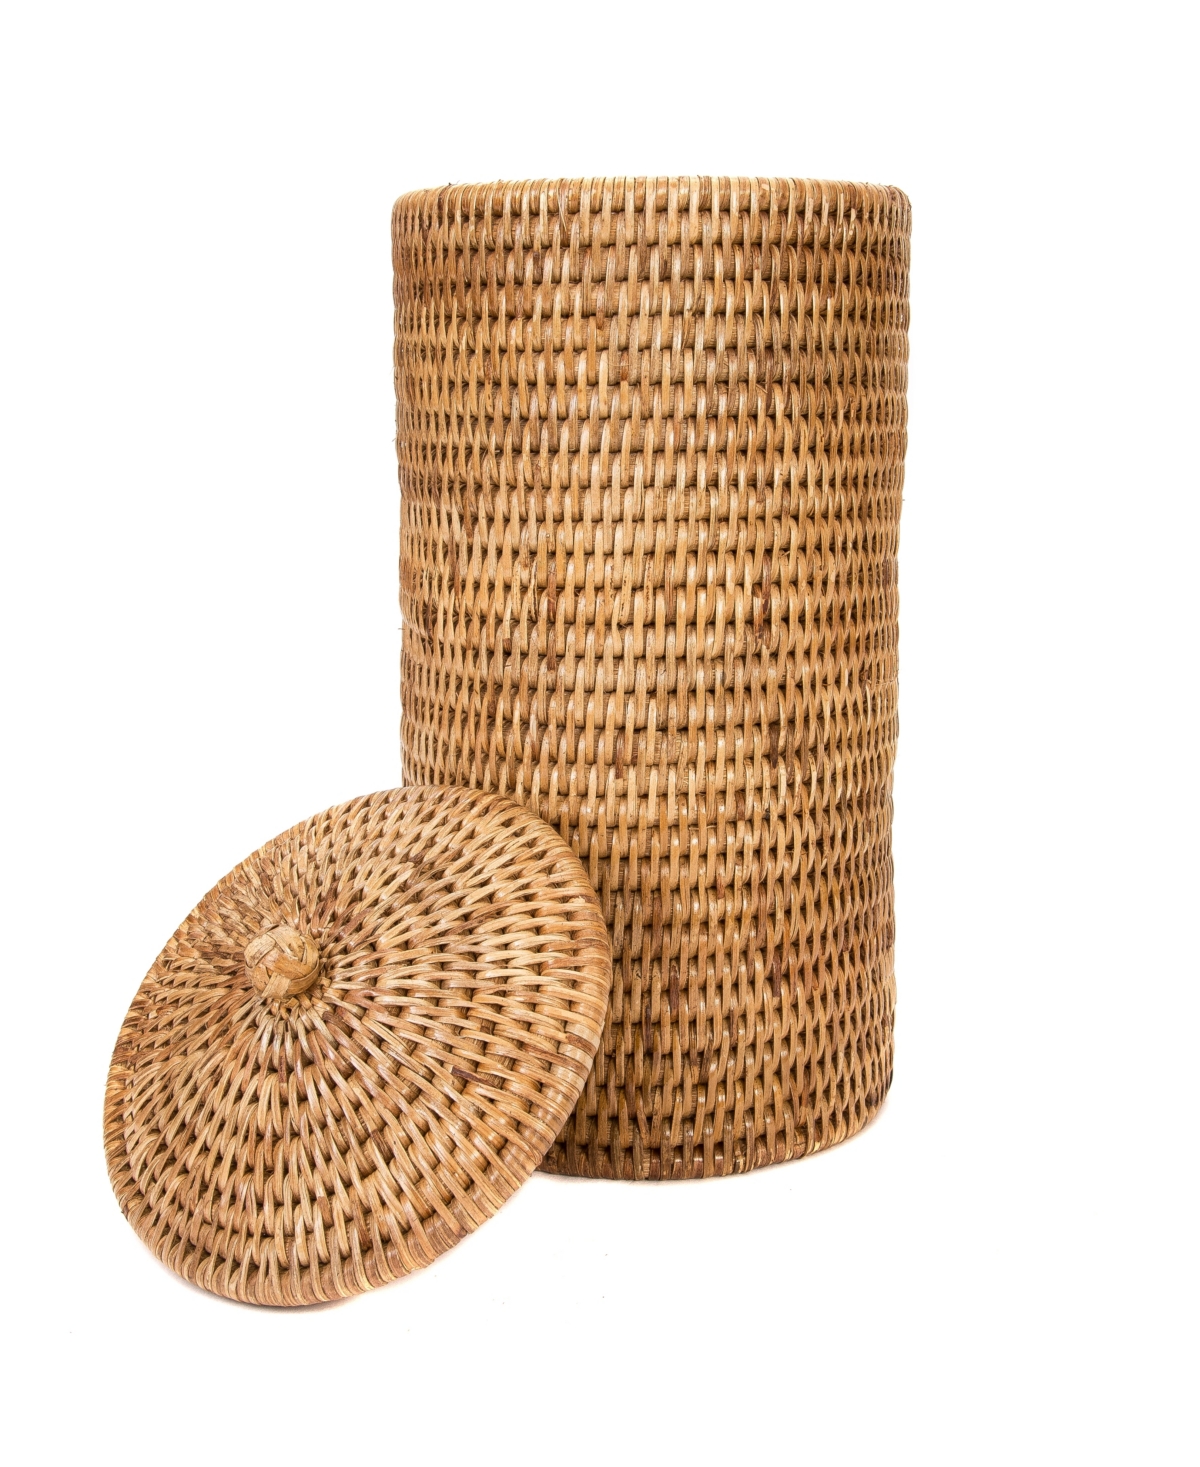 Artifacts Rattan Double Toilet Roll Holder - Off-White